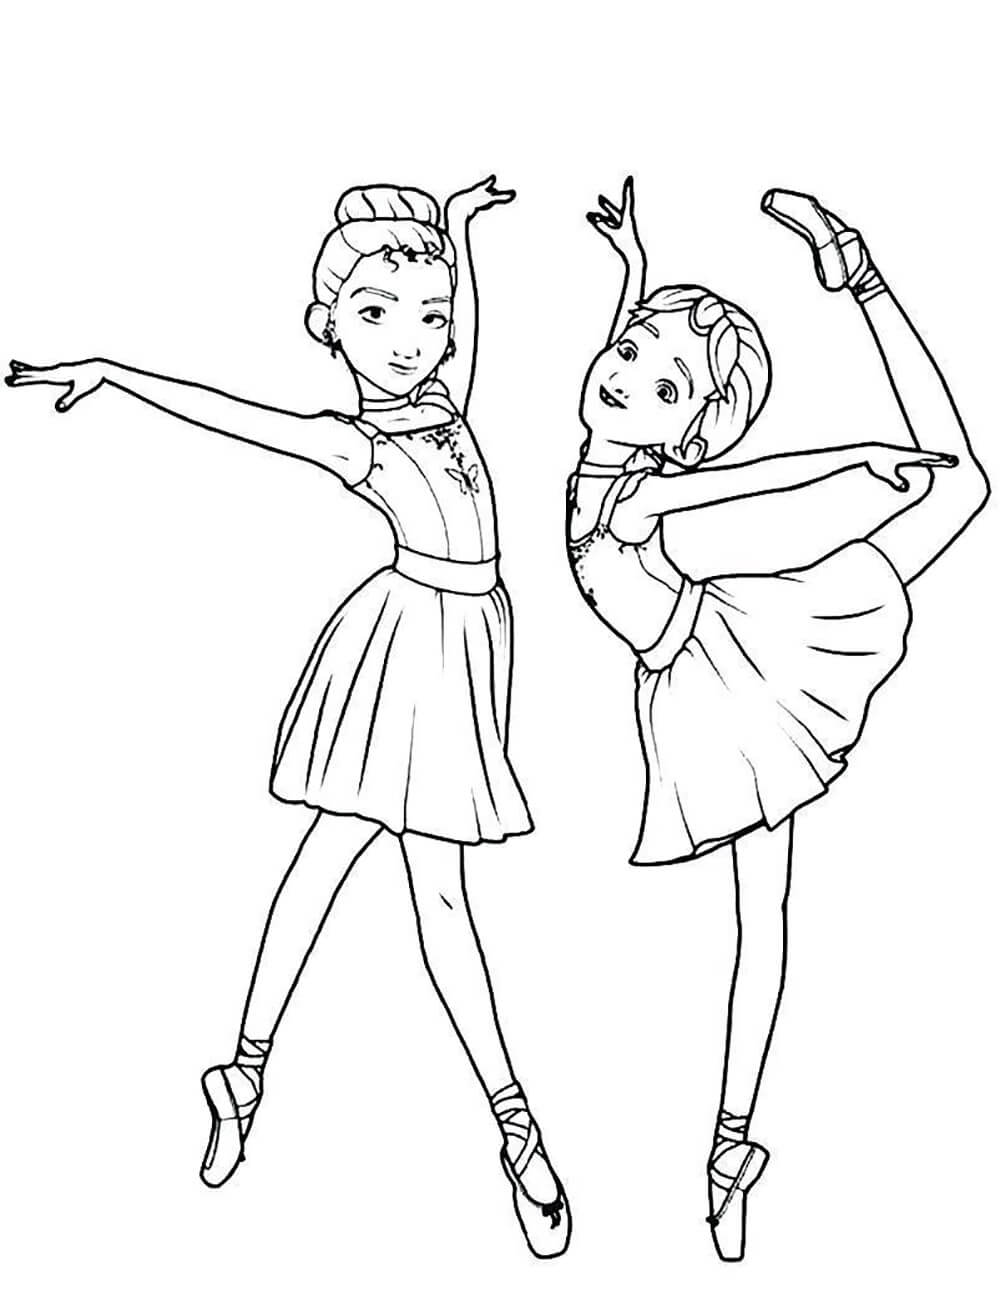 Cute Ballerina Coloring Page Free Printable Coloring Pages For Kids